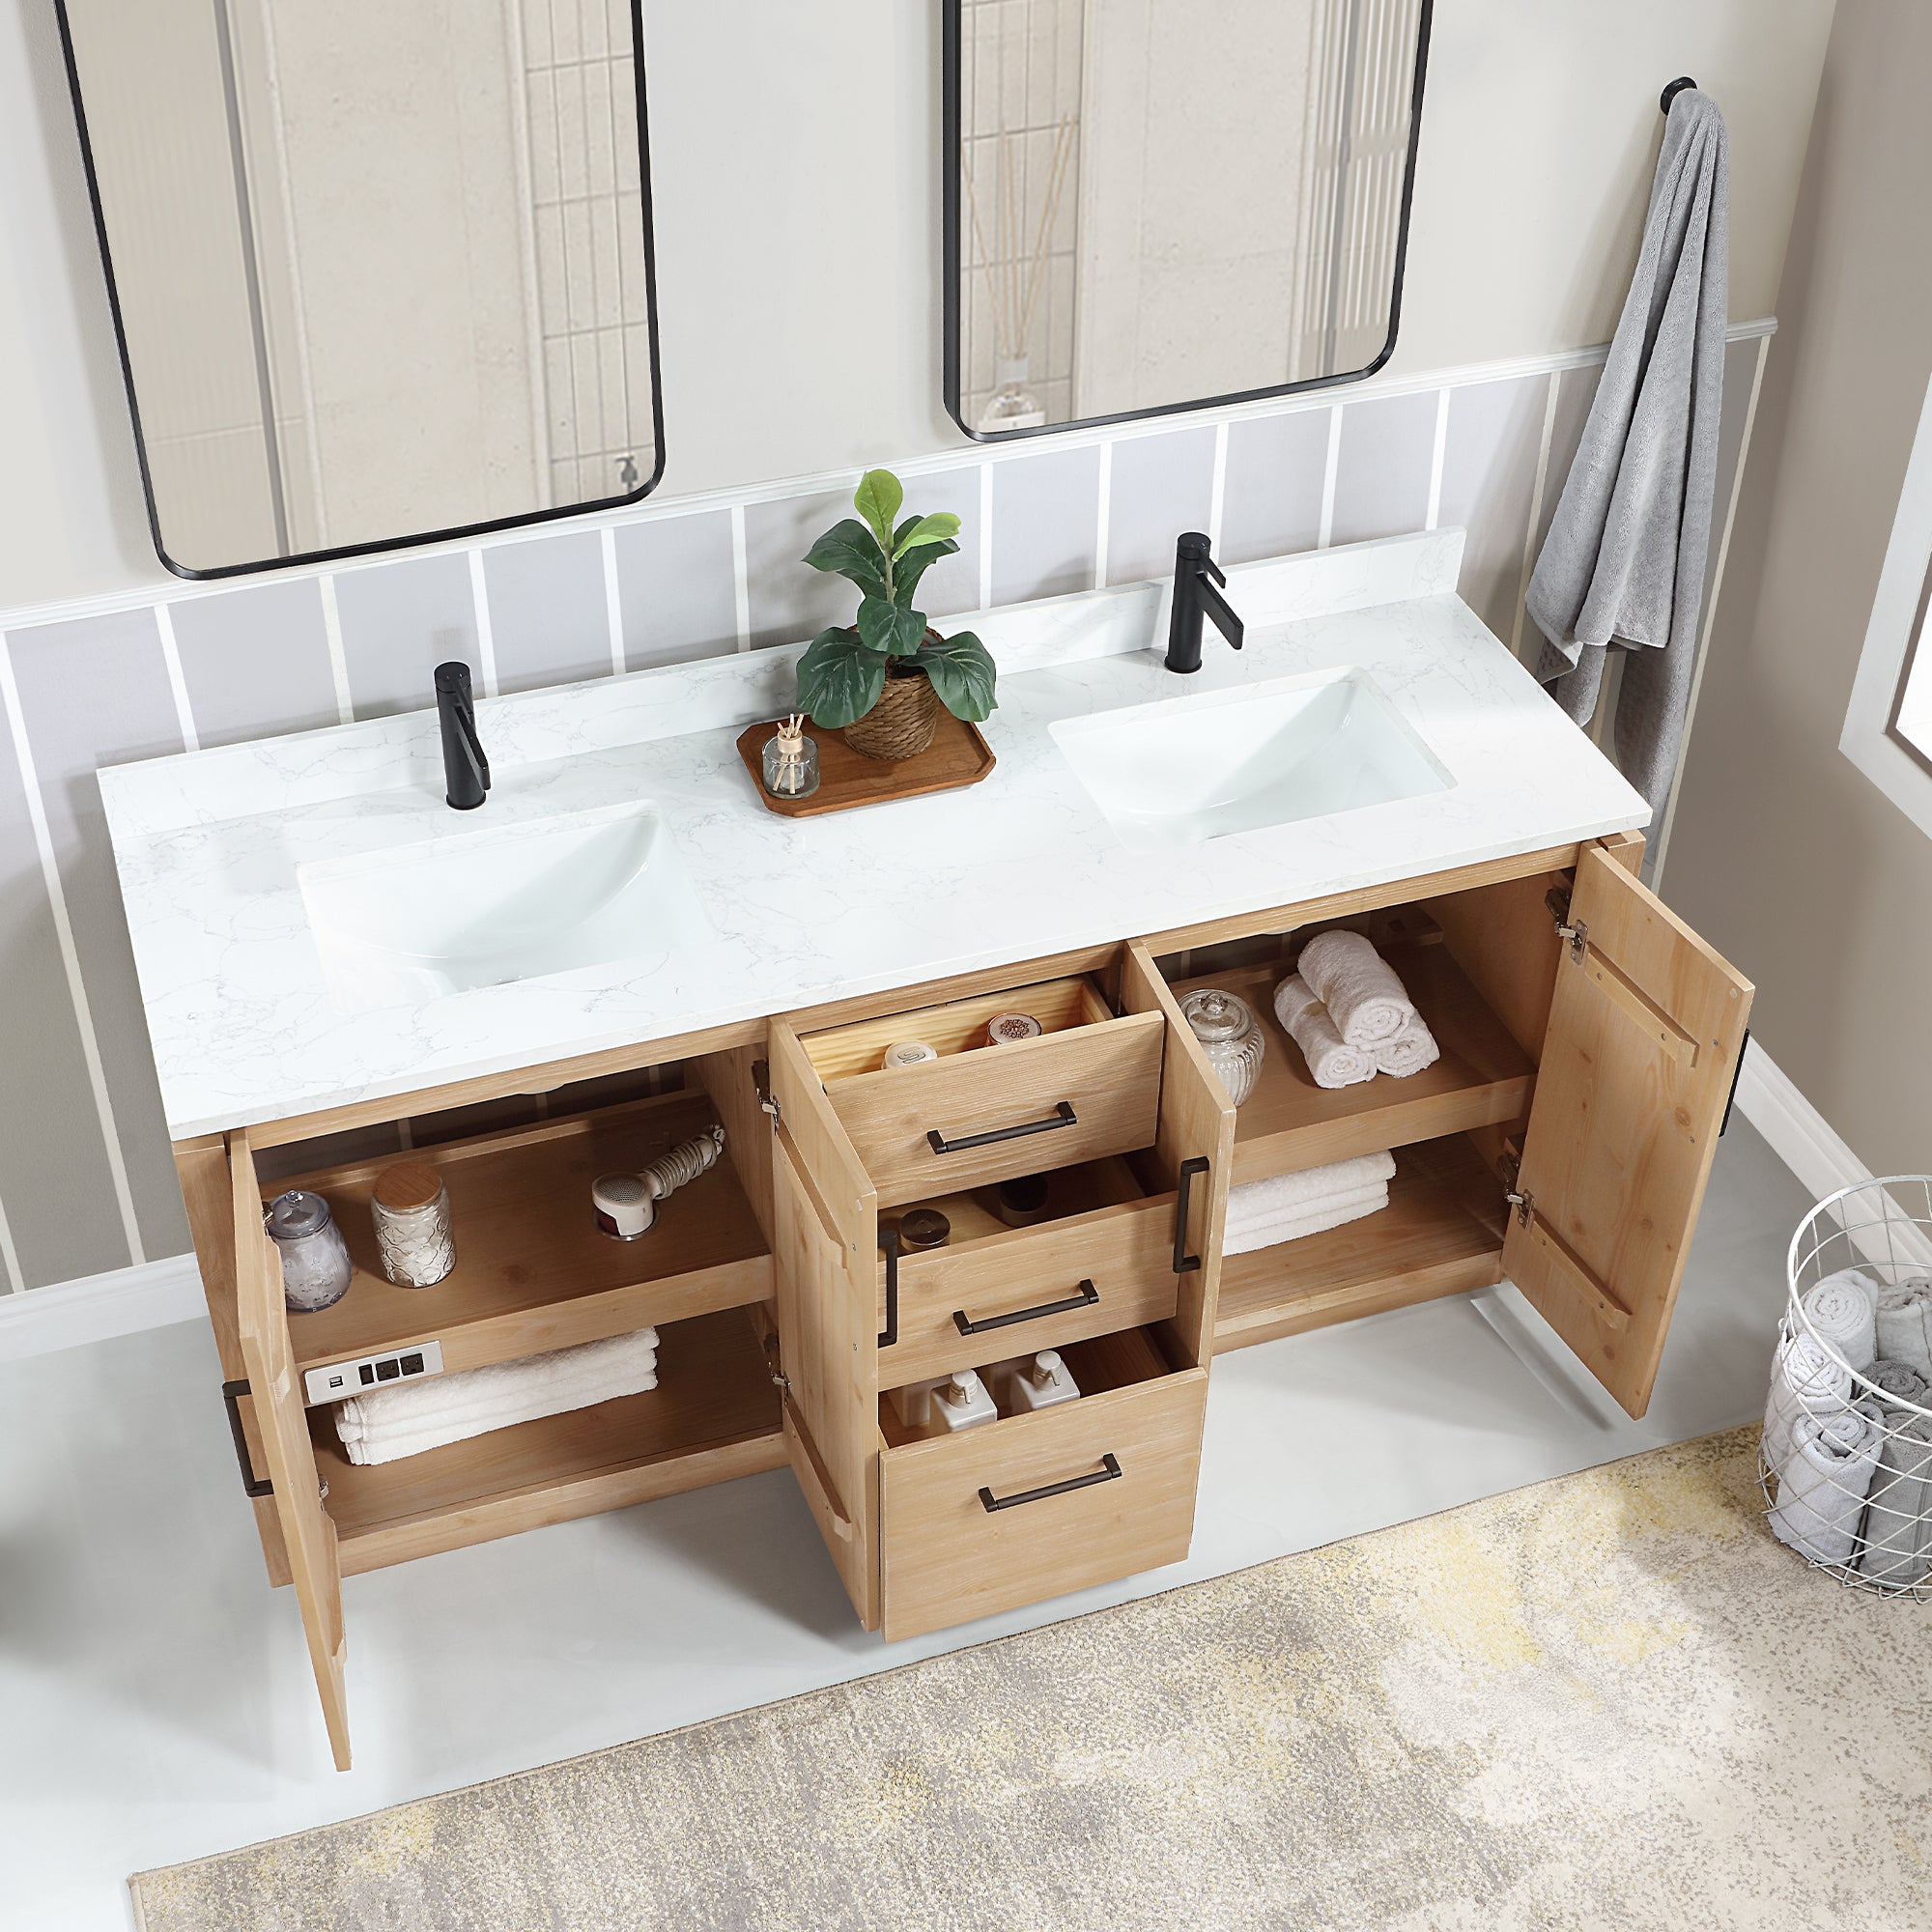 San 72" Free-standing Double Bath Vanity in Fir Wood Brown with White Grain Composite Stone Top